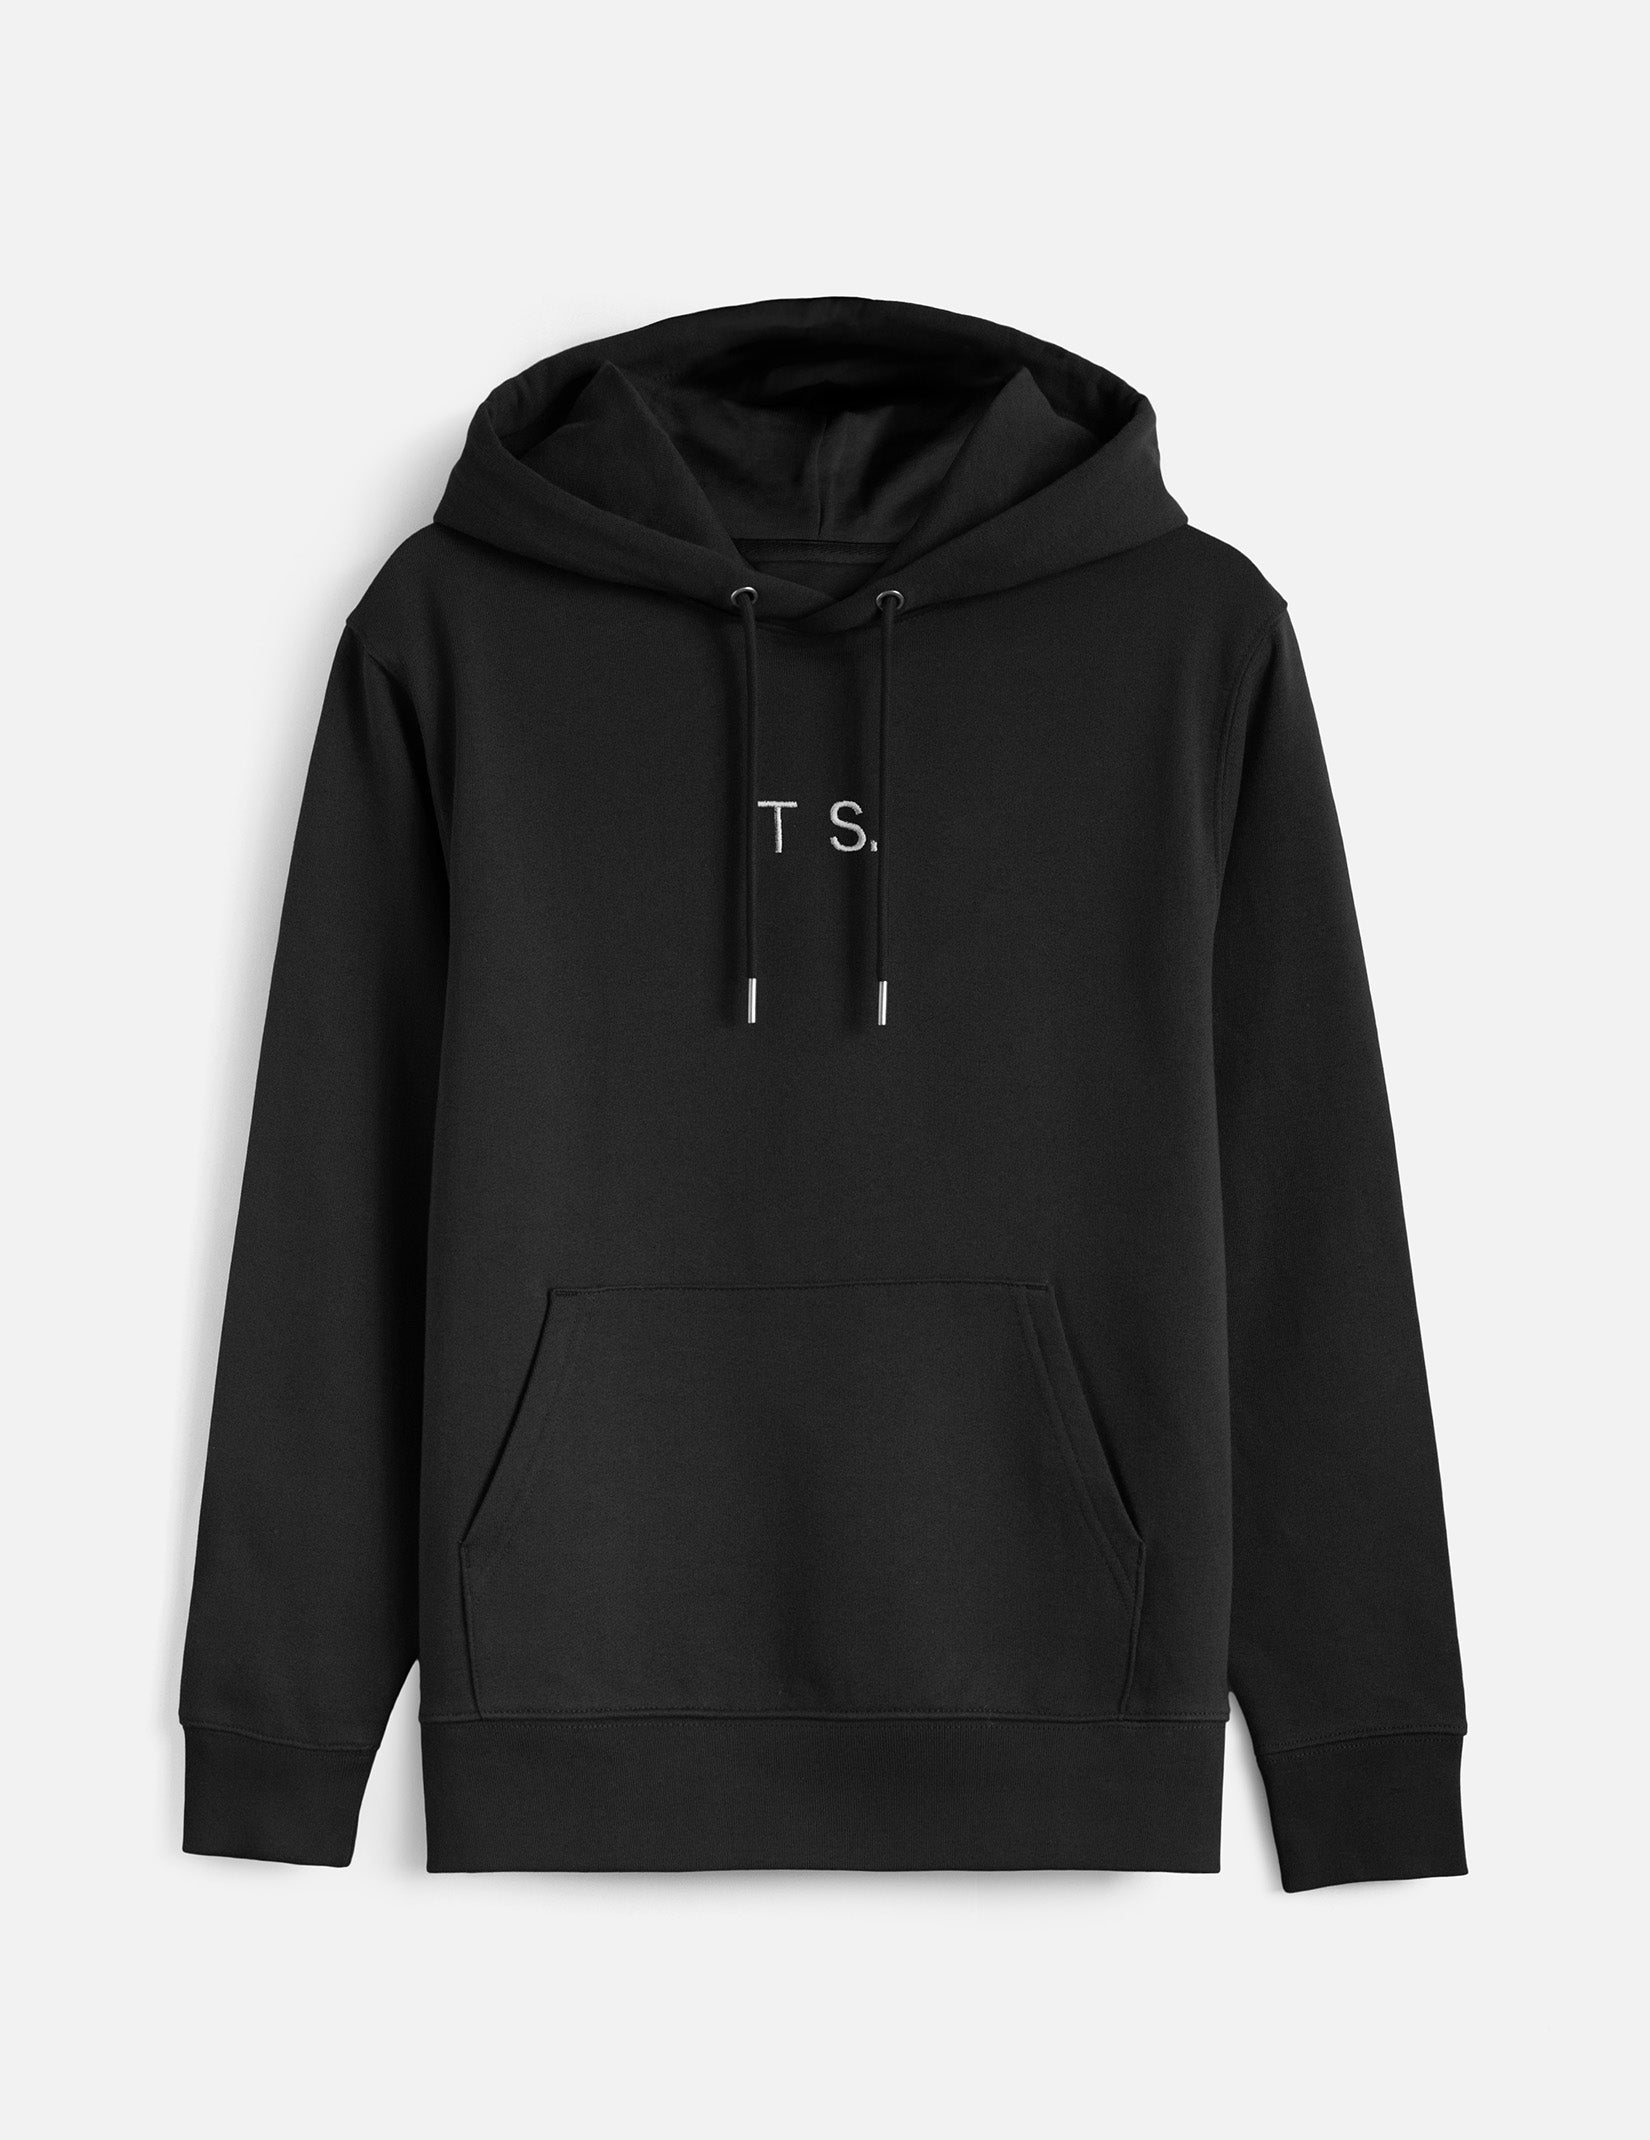 A black coloured hoodie viewed from the front. The letters 'T' and 'S' are embroidered at the centre are in white